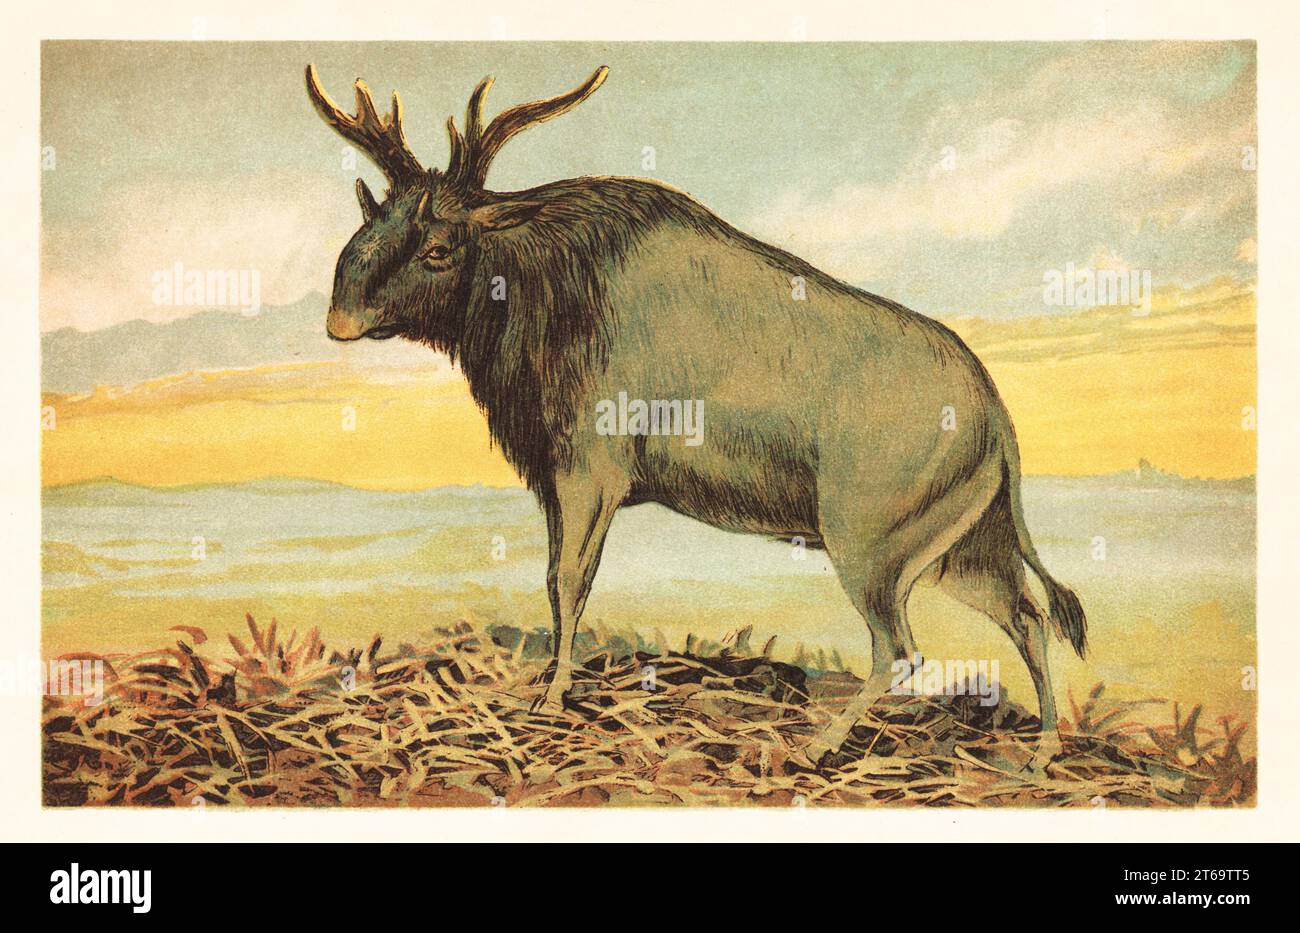 Shiva's beast or Sivatherium, Sivatherium giganteum, extinct species of giraffid of the Late Miocene to the late Early Pleistocene (Calabrian). Sivatherium giganteum Falconer and Cautley. Colour printed illustration by F. John from Wilhelm Bolsches Tiere der Urwelt (Animals of the Prehistoric World), Reichardt Cocoa company, Hamburg, 1908. Stock Photo